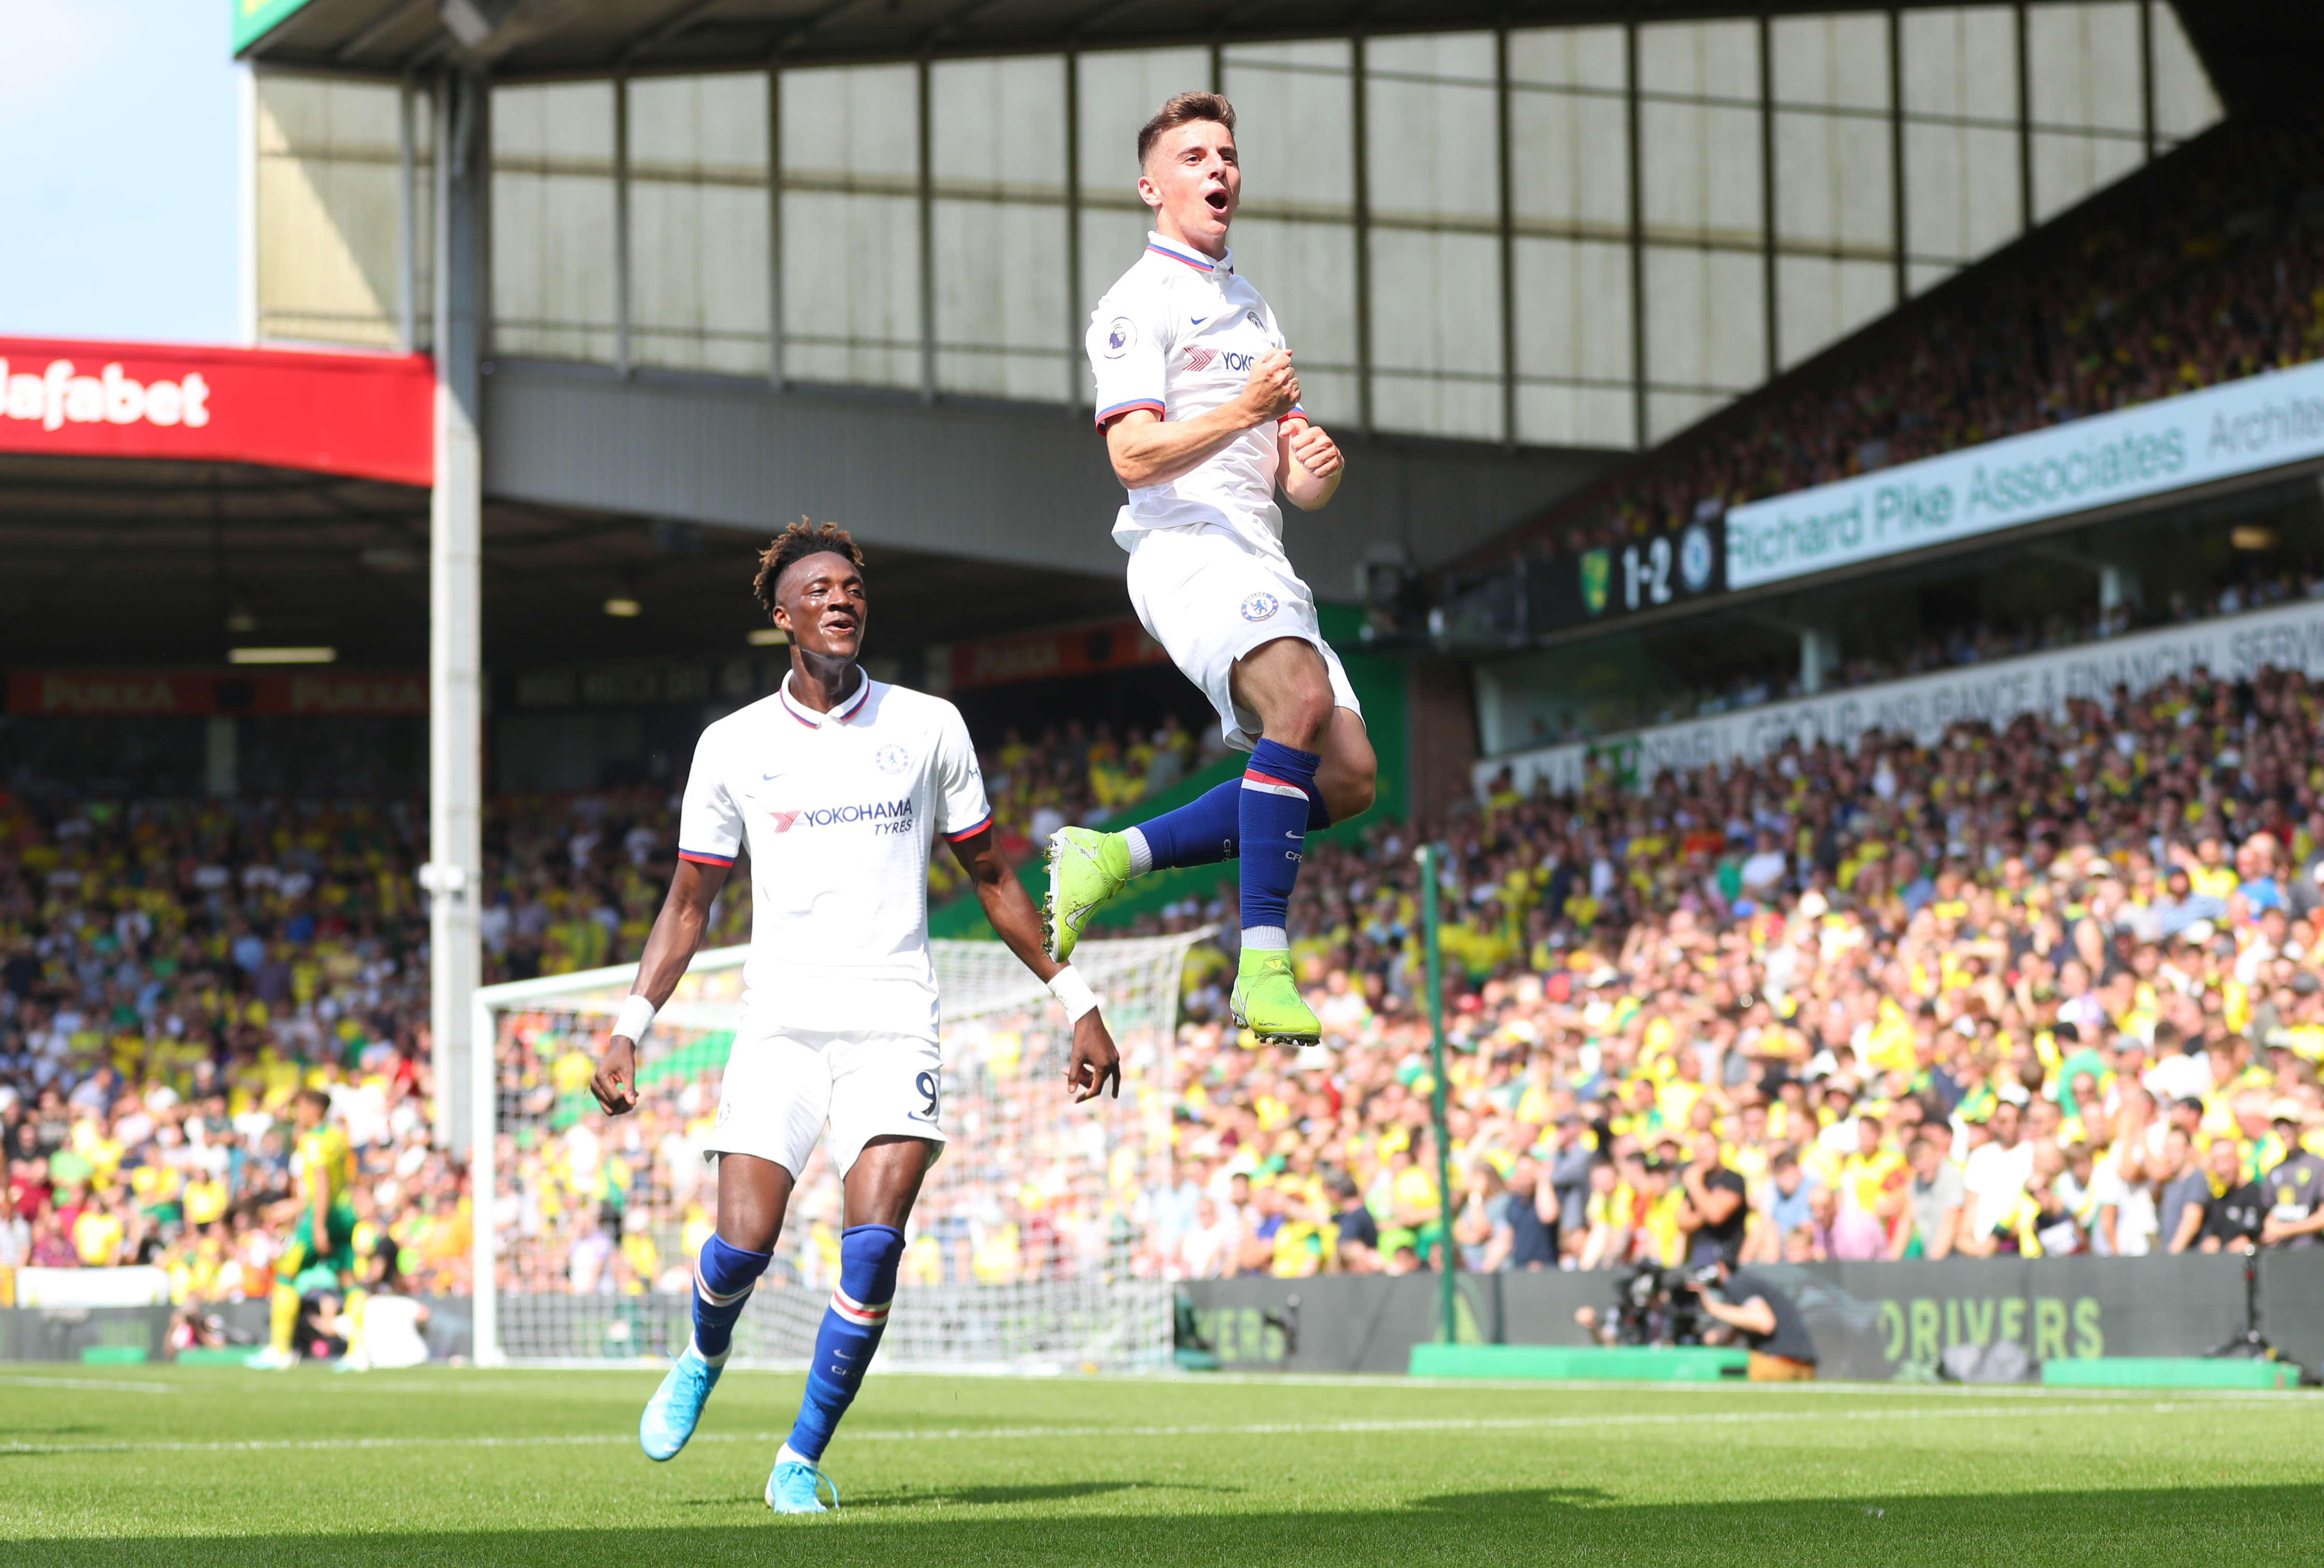 NORWICH, ENGLAND - AUGUST 24: Mason Mount of Chelsea celebrates scoring his teams second goal with Tammy Abraham during the Premier League match between Norwich City and Chelsea FC at Carrow Road on August 24, 2019 in Norwich, United Kingdom. (Photo by Catherine Ivill/Getty Images)